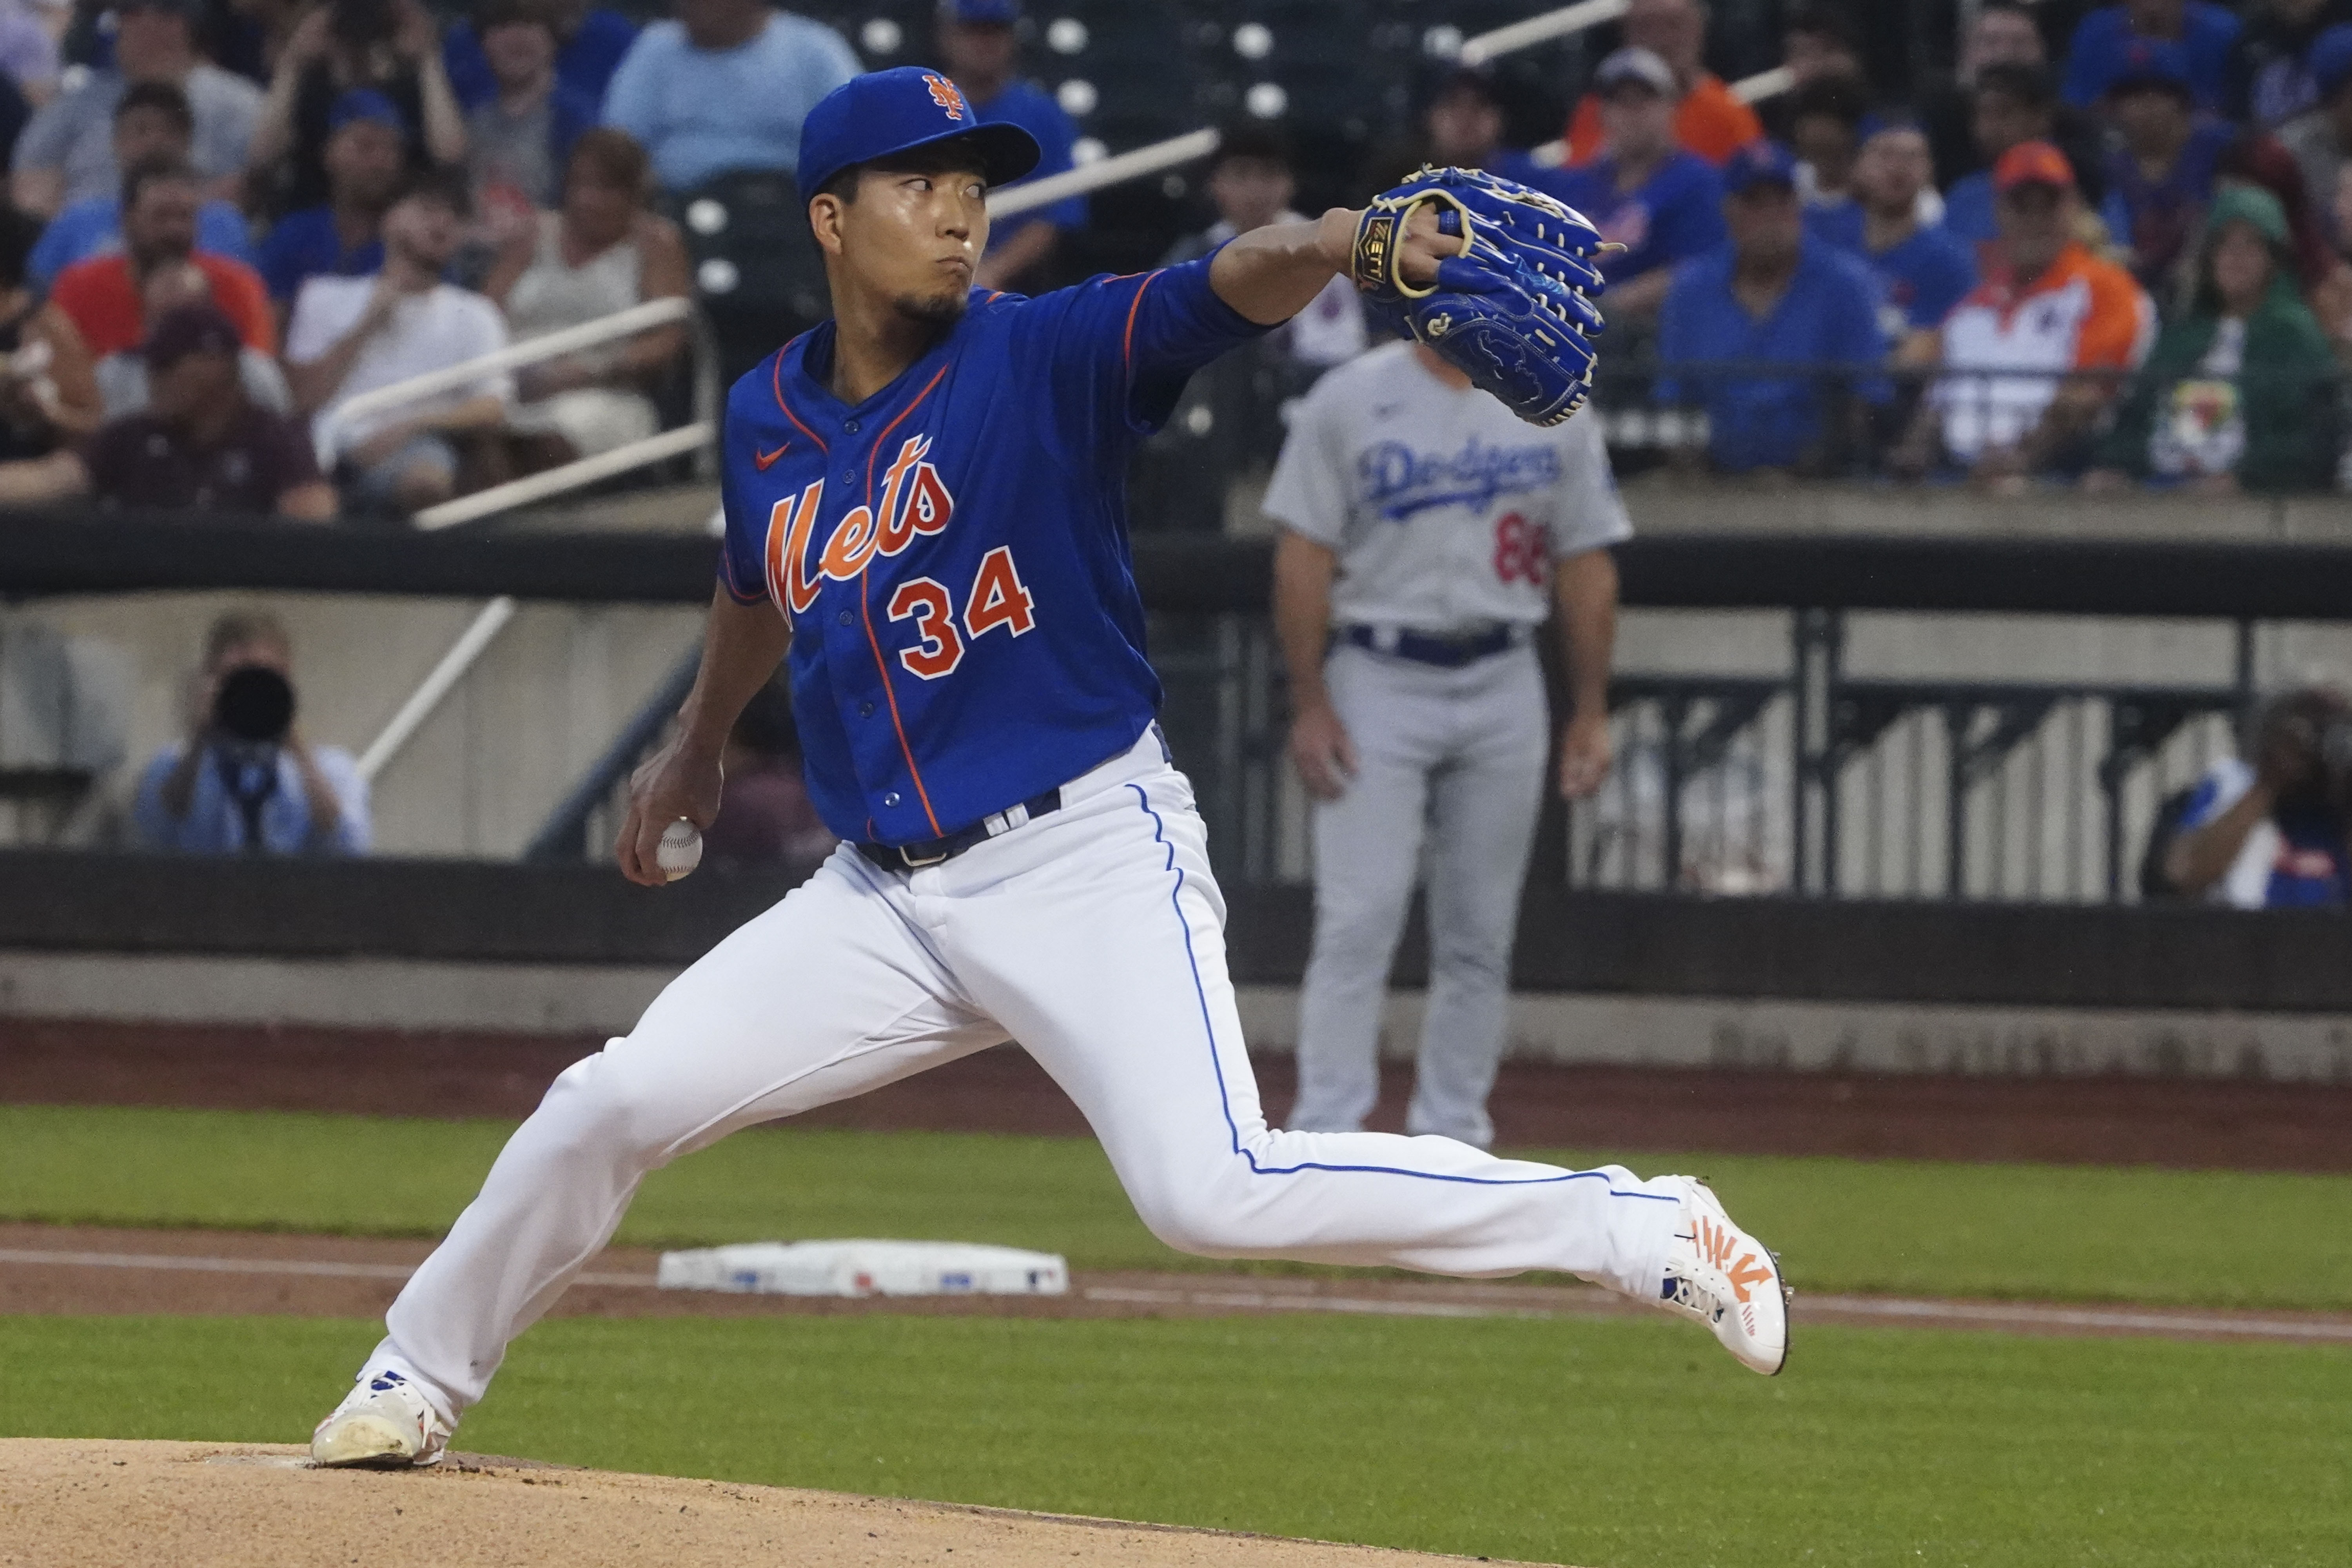 Mets-Dodgers, Aug. 21: Odds, Preview, Prediction